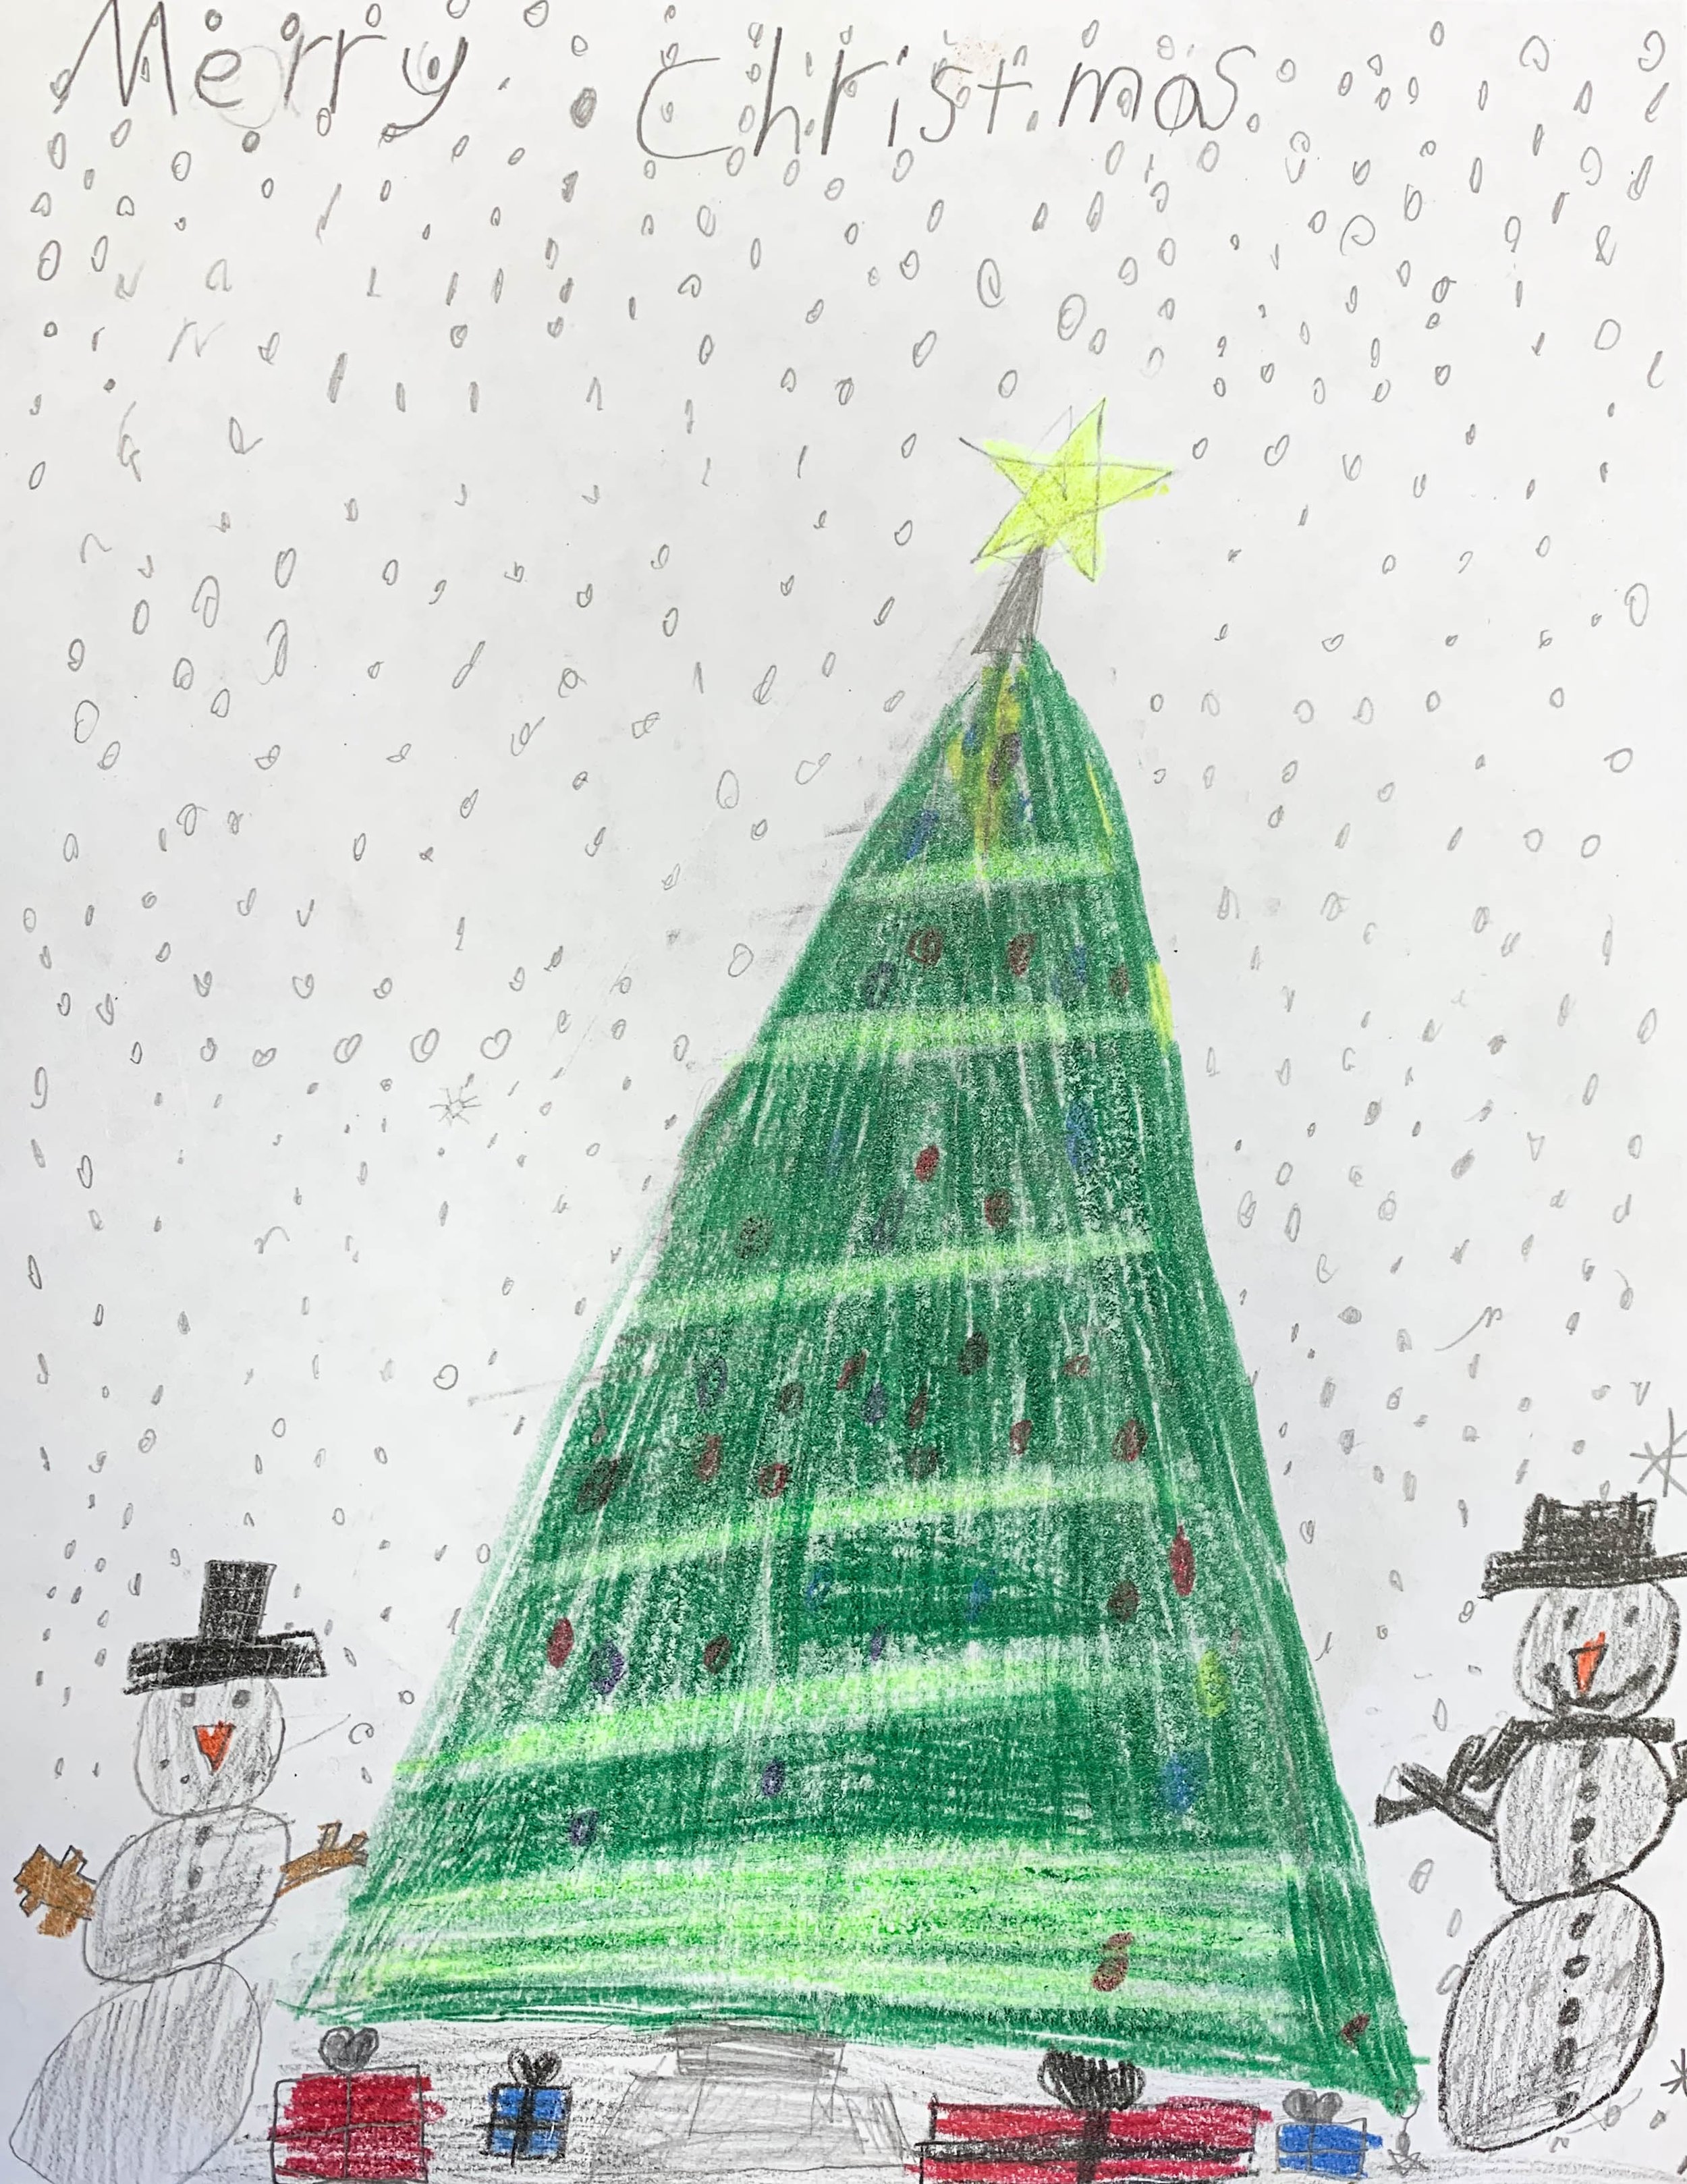 Artwork by Grade 2 Student from Royal Road Elementary School